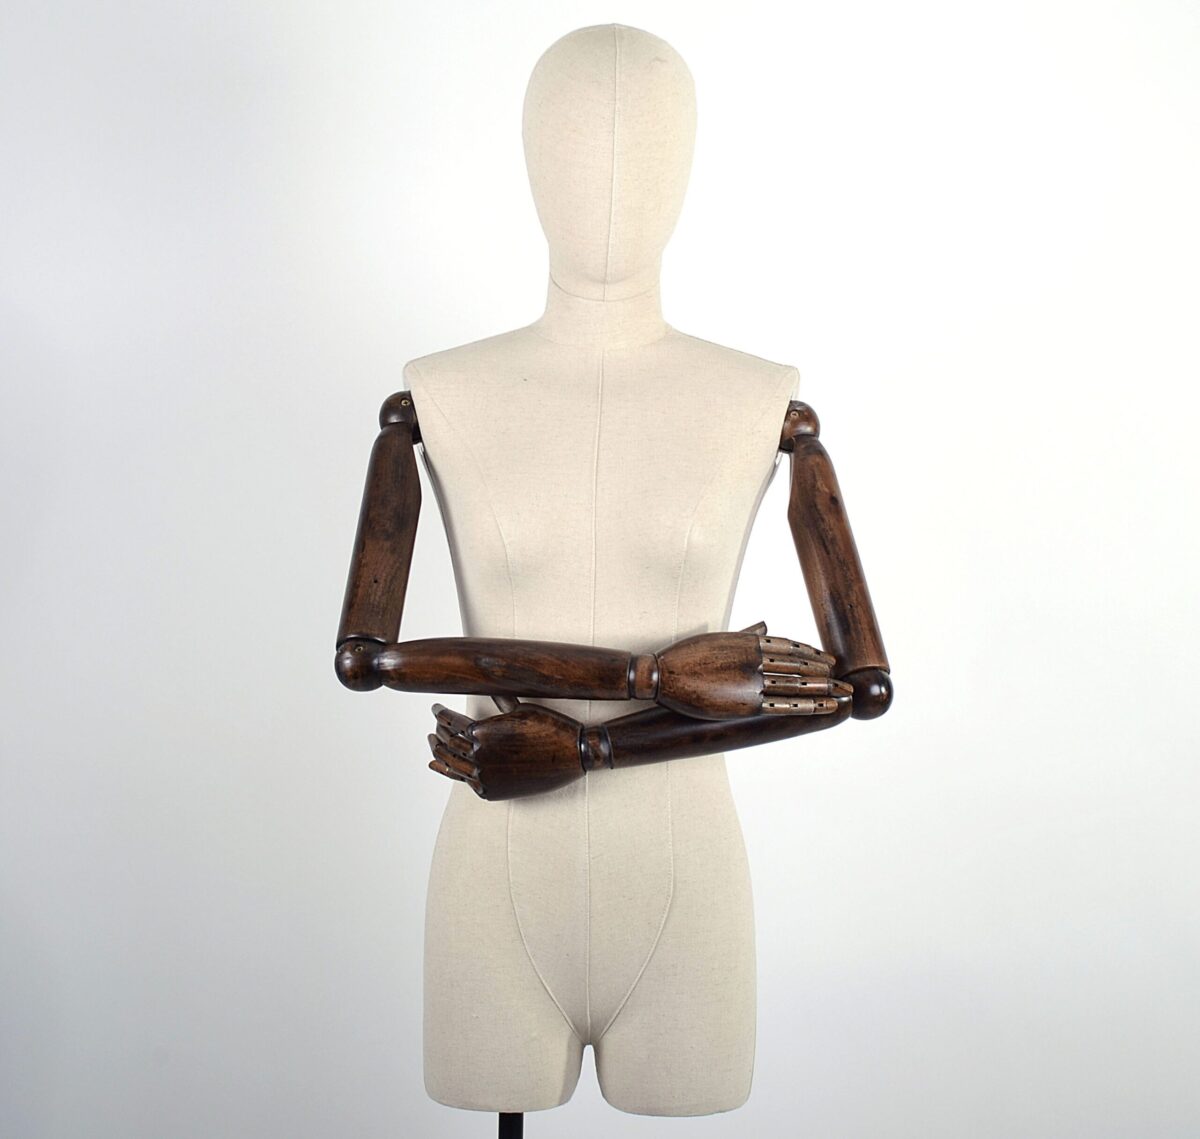 Articulated Female Torso Arms Crossed scaled